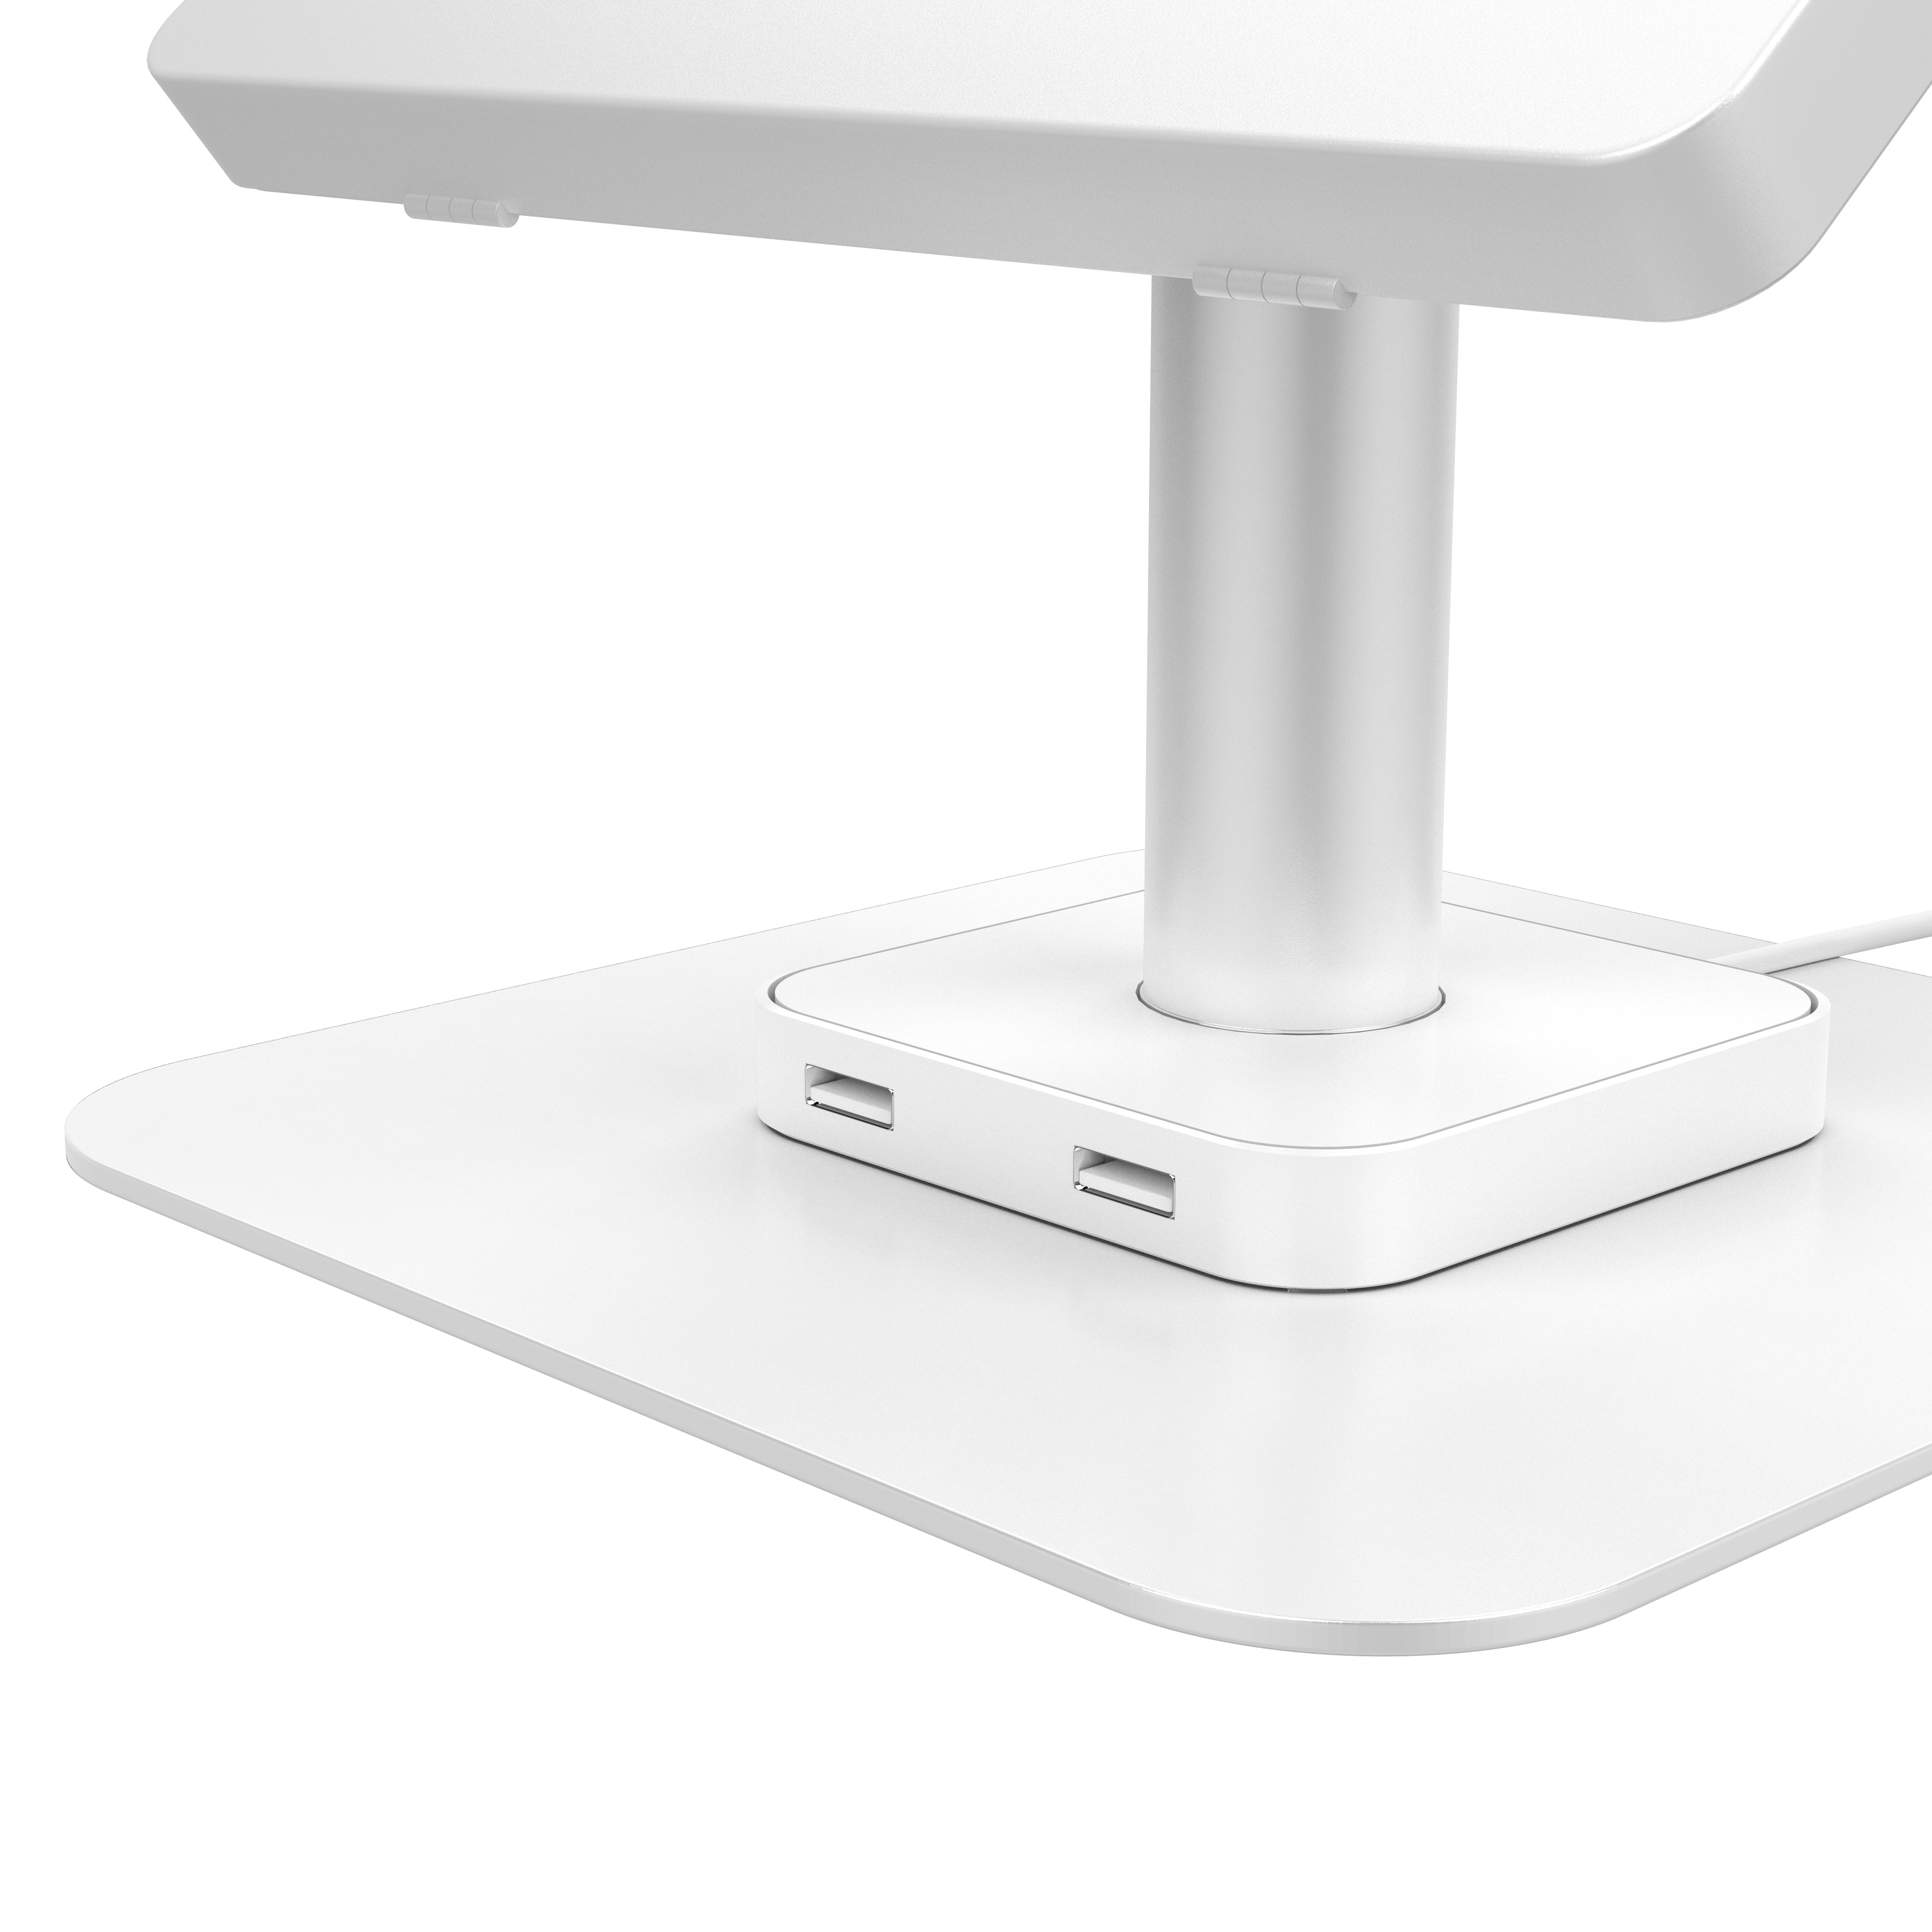 VESA Compatible Desk Mount with USB Ports and Cable Routing